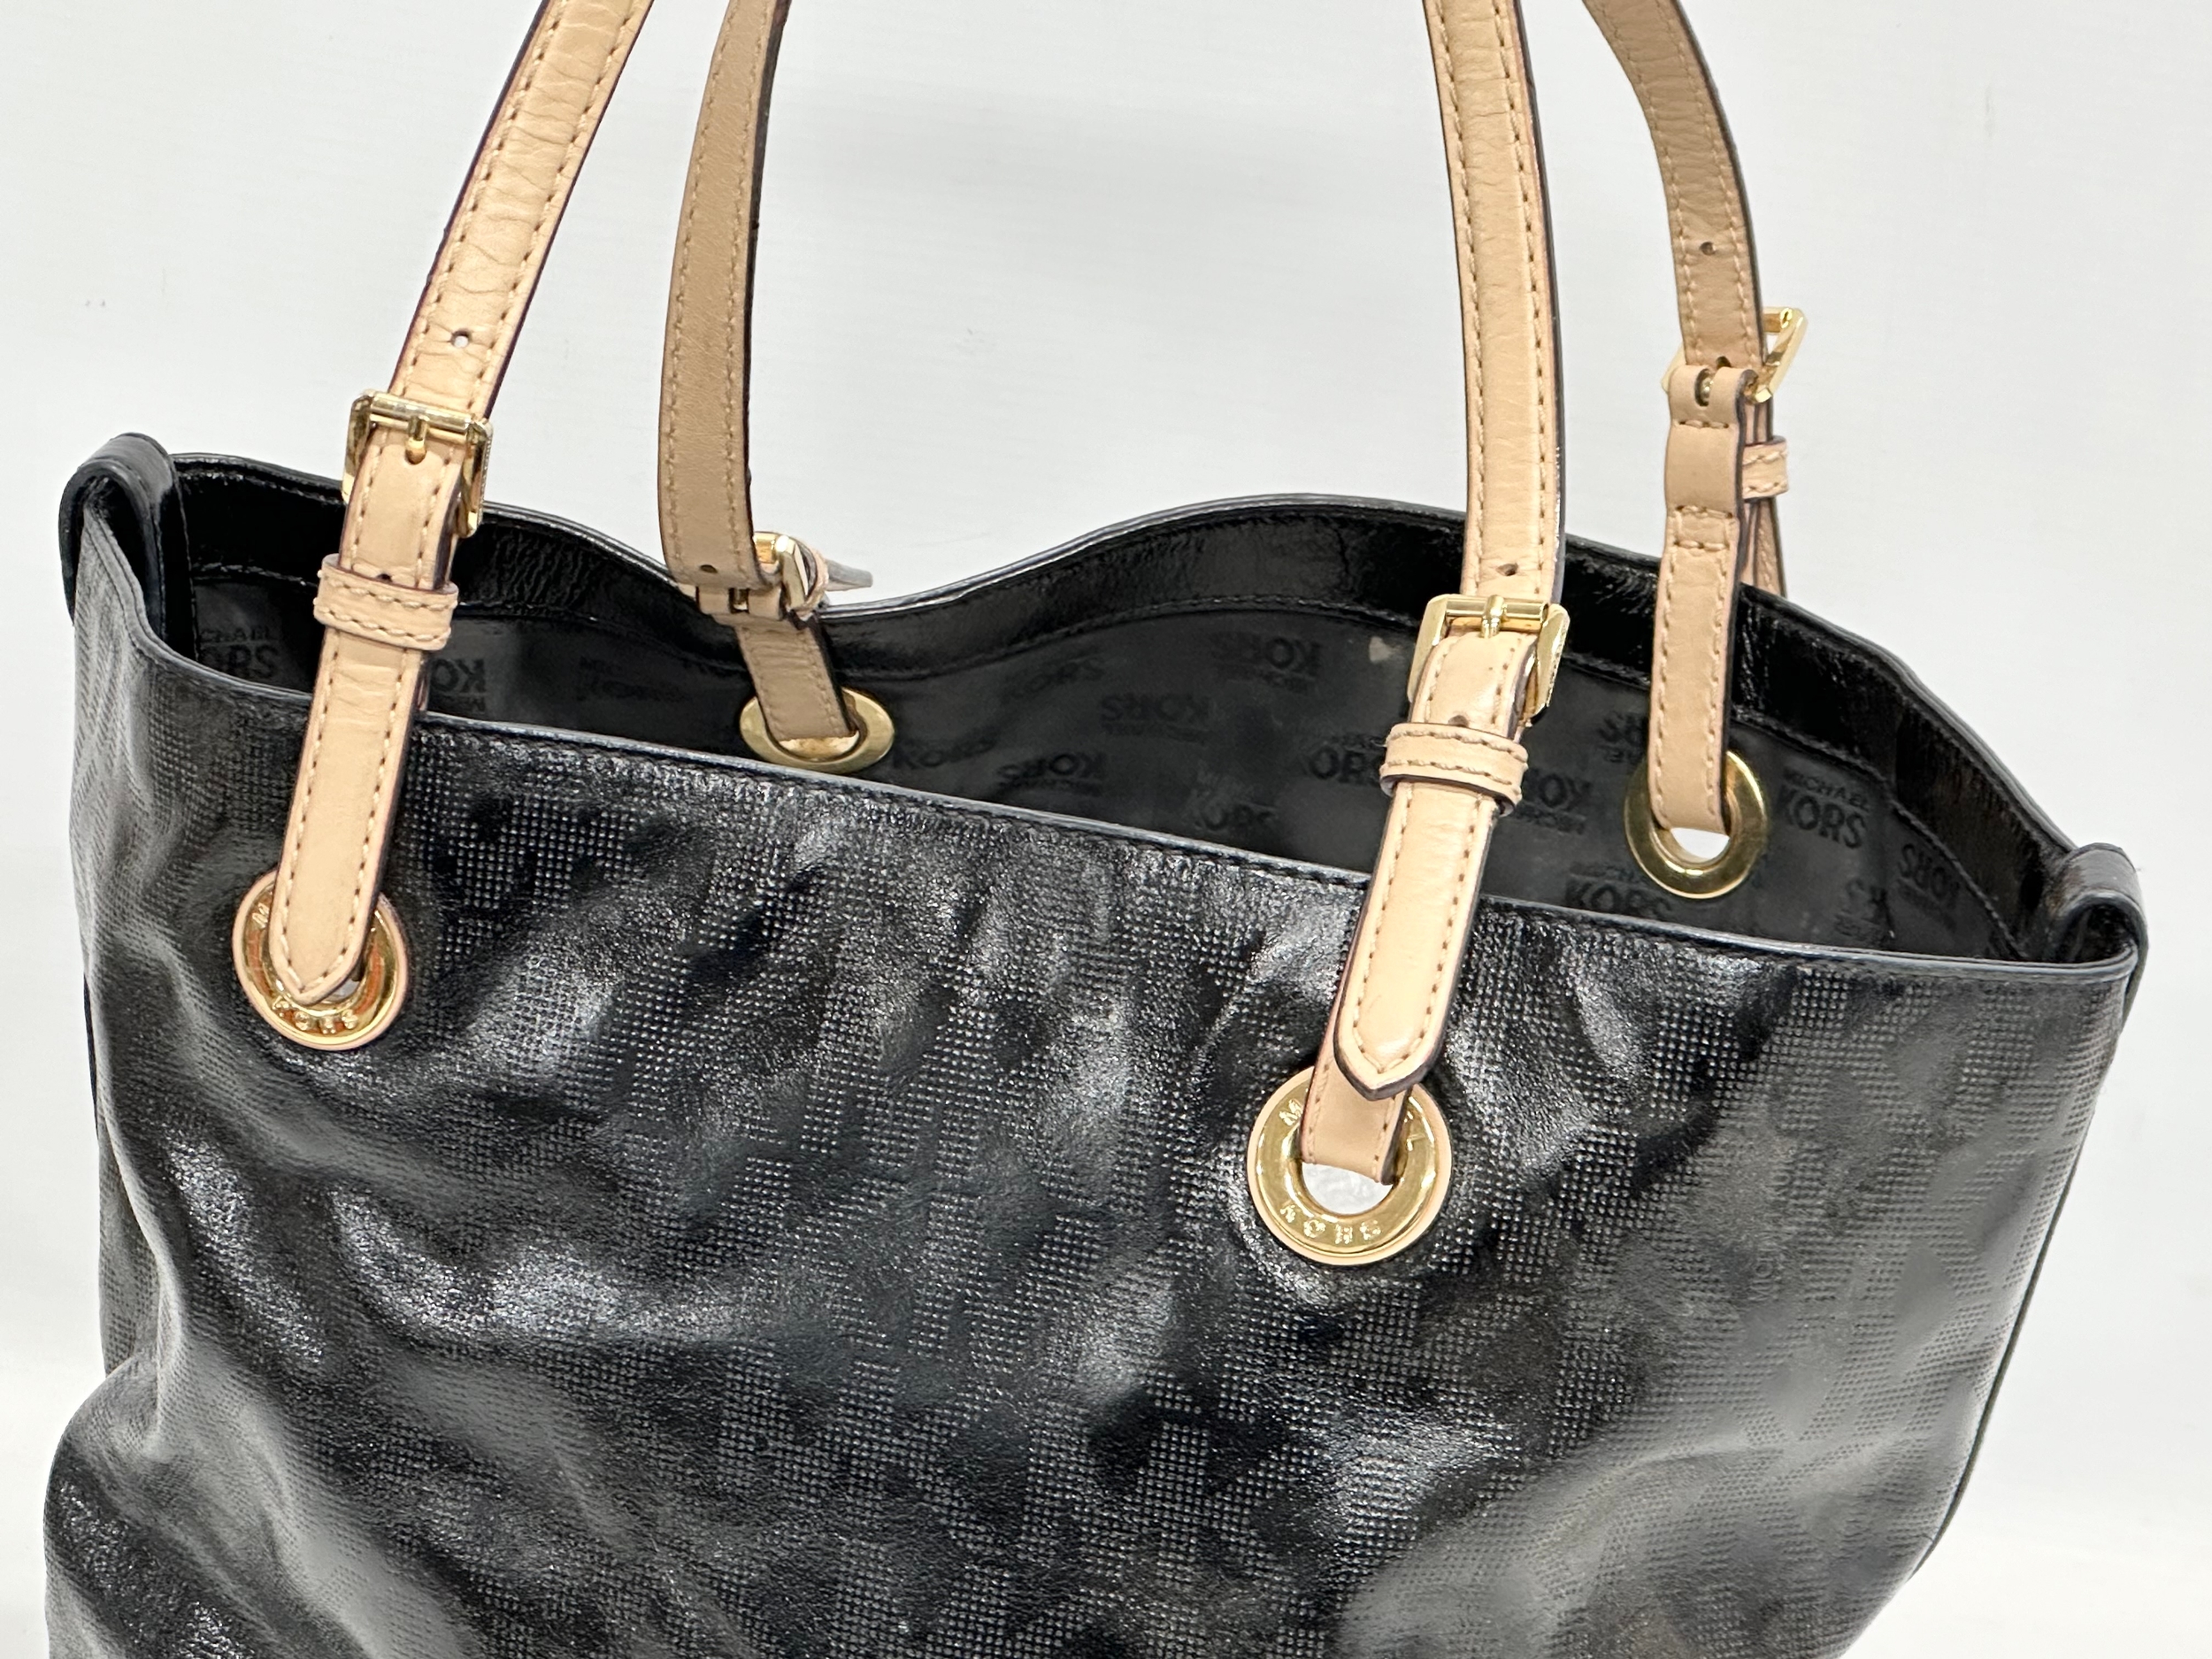 A Michael Kors patent leather tote bag. - Image 3 of 3